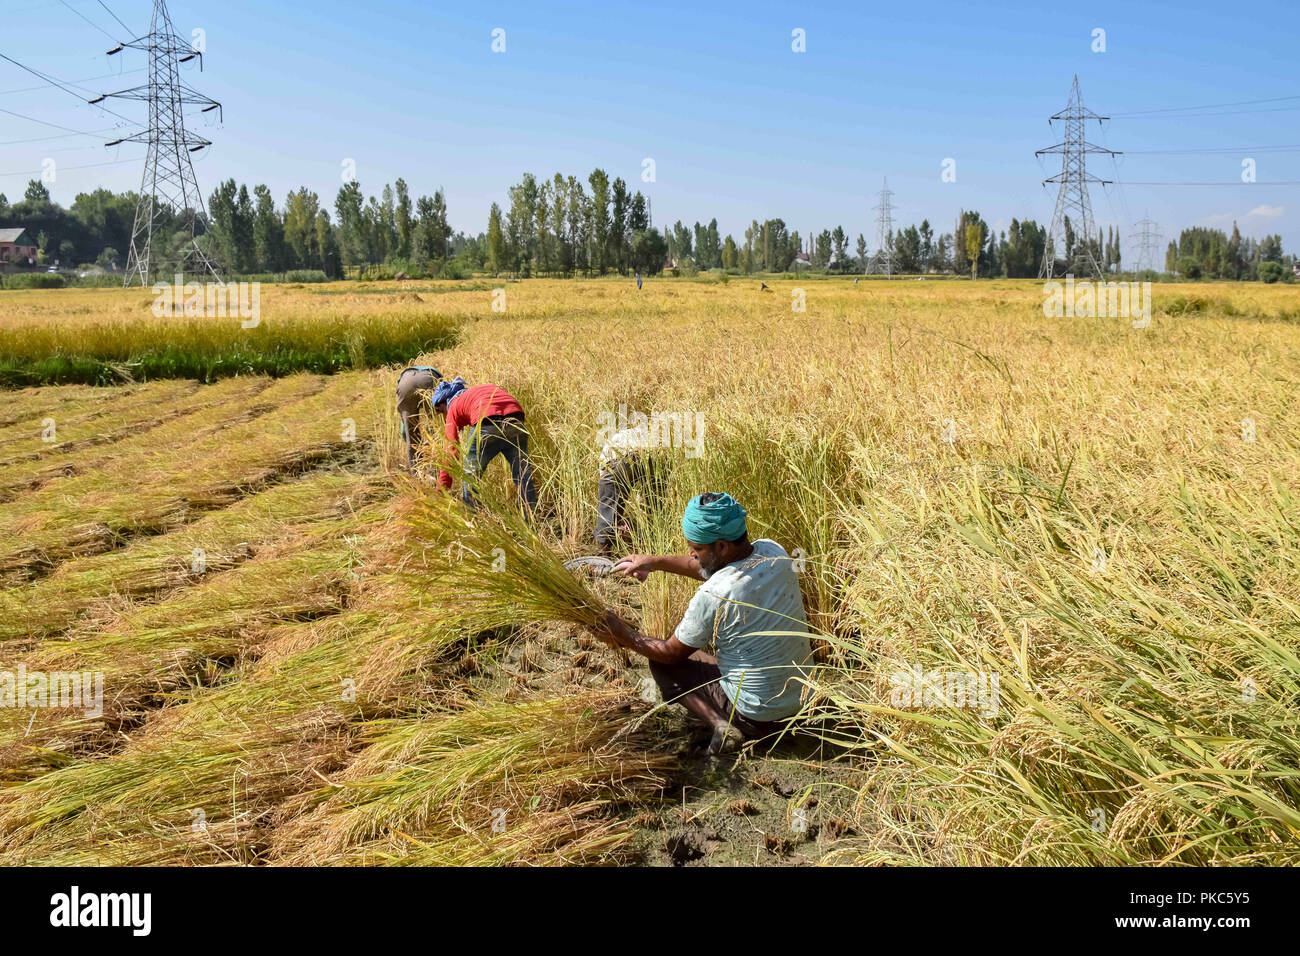 September 12, 2018 - Budgam, Jammu & Kashmir, India - Rice workers seen harvesting crops in a field in Budgam..Rice is the staple food for people of Jammu and Kashmir particularly of Kashmiris. The valley constitutes about two-thirds of the total area under rice cultivation in the whole state. (Credit Image: © Idrees Abbas/SOPA Images via ZUMA Wire) Stock Photo